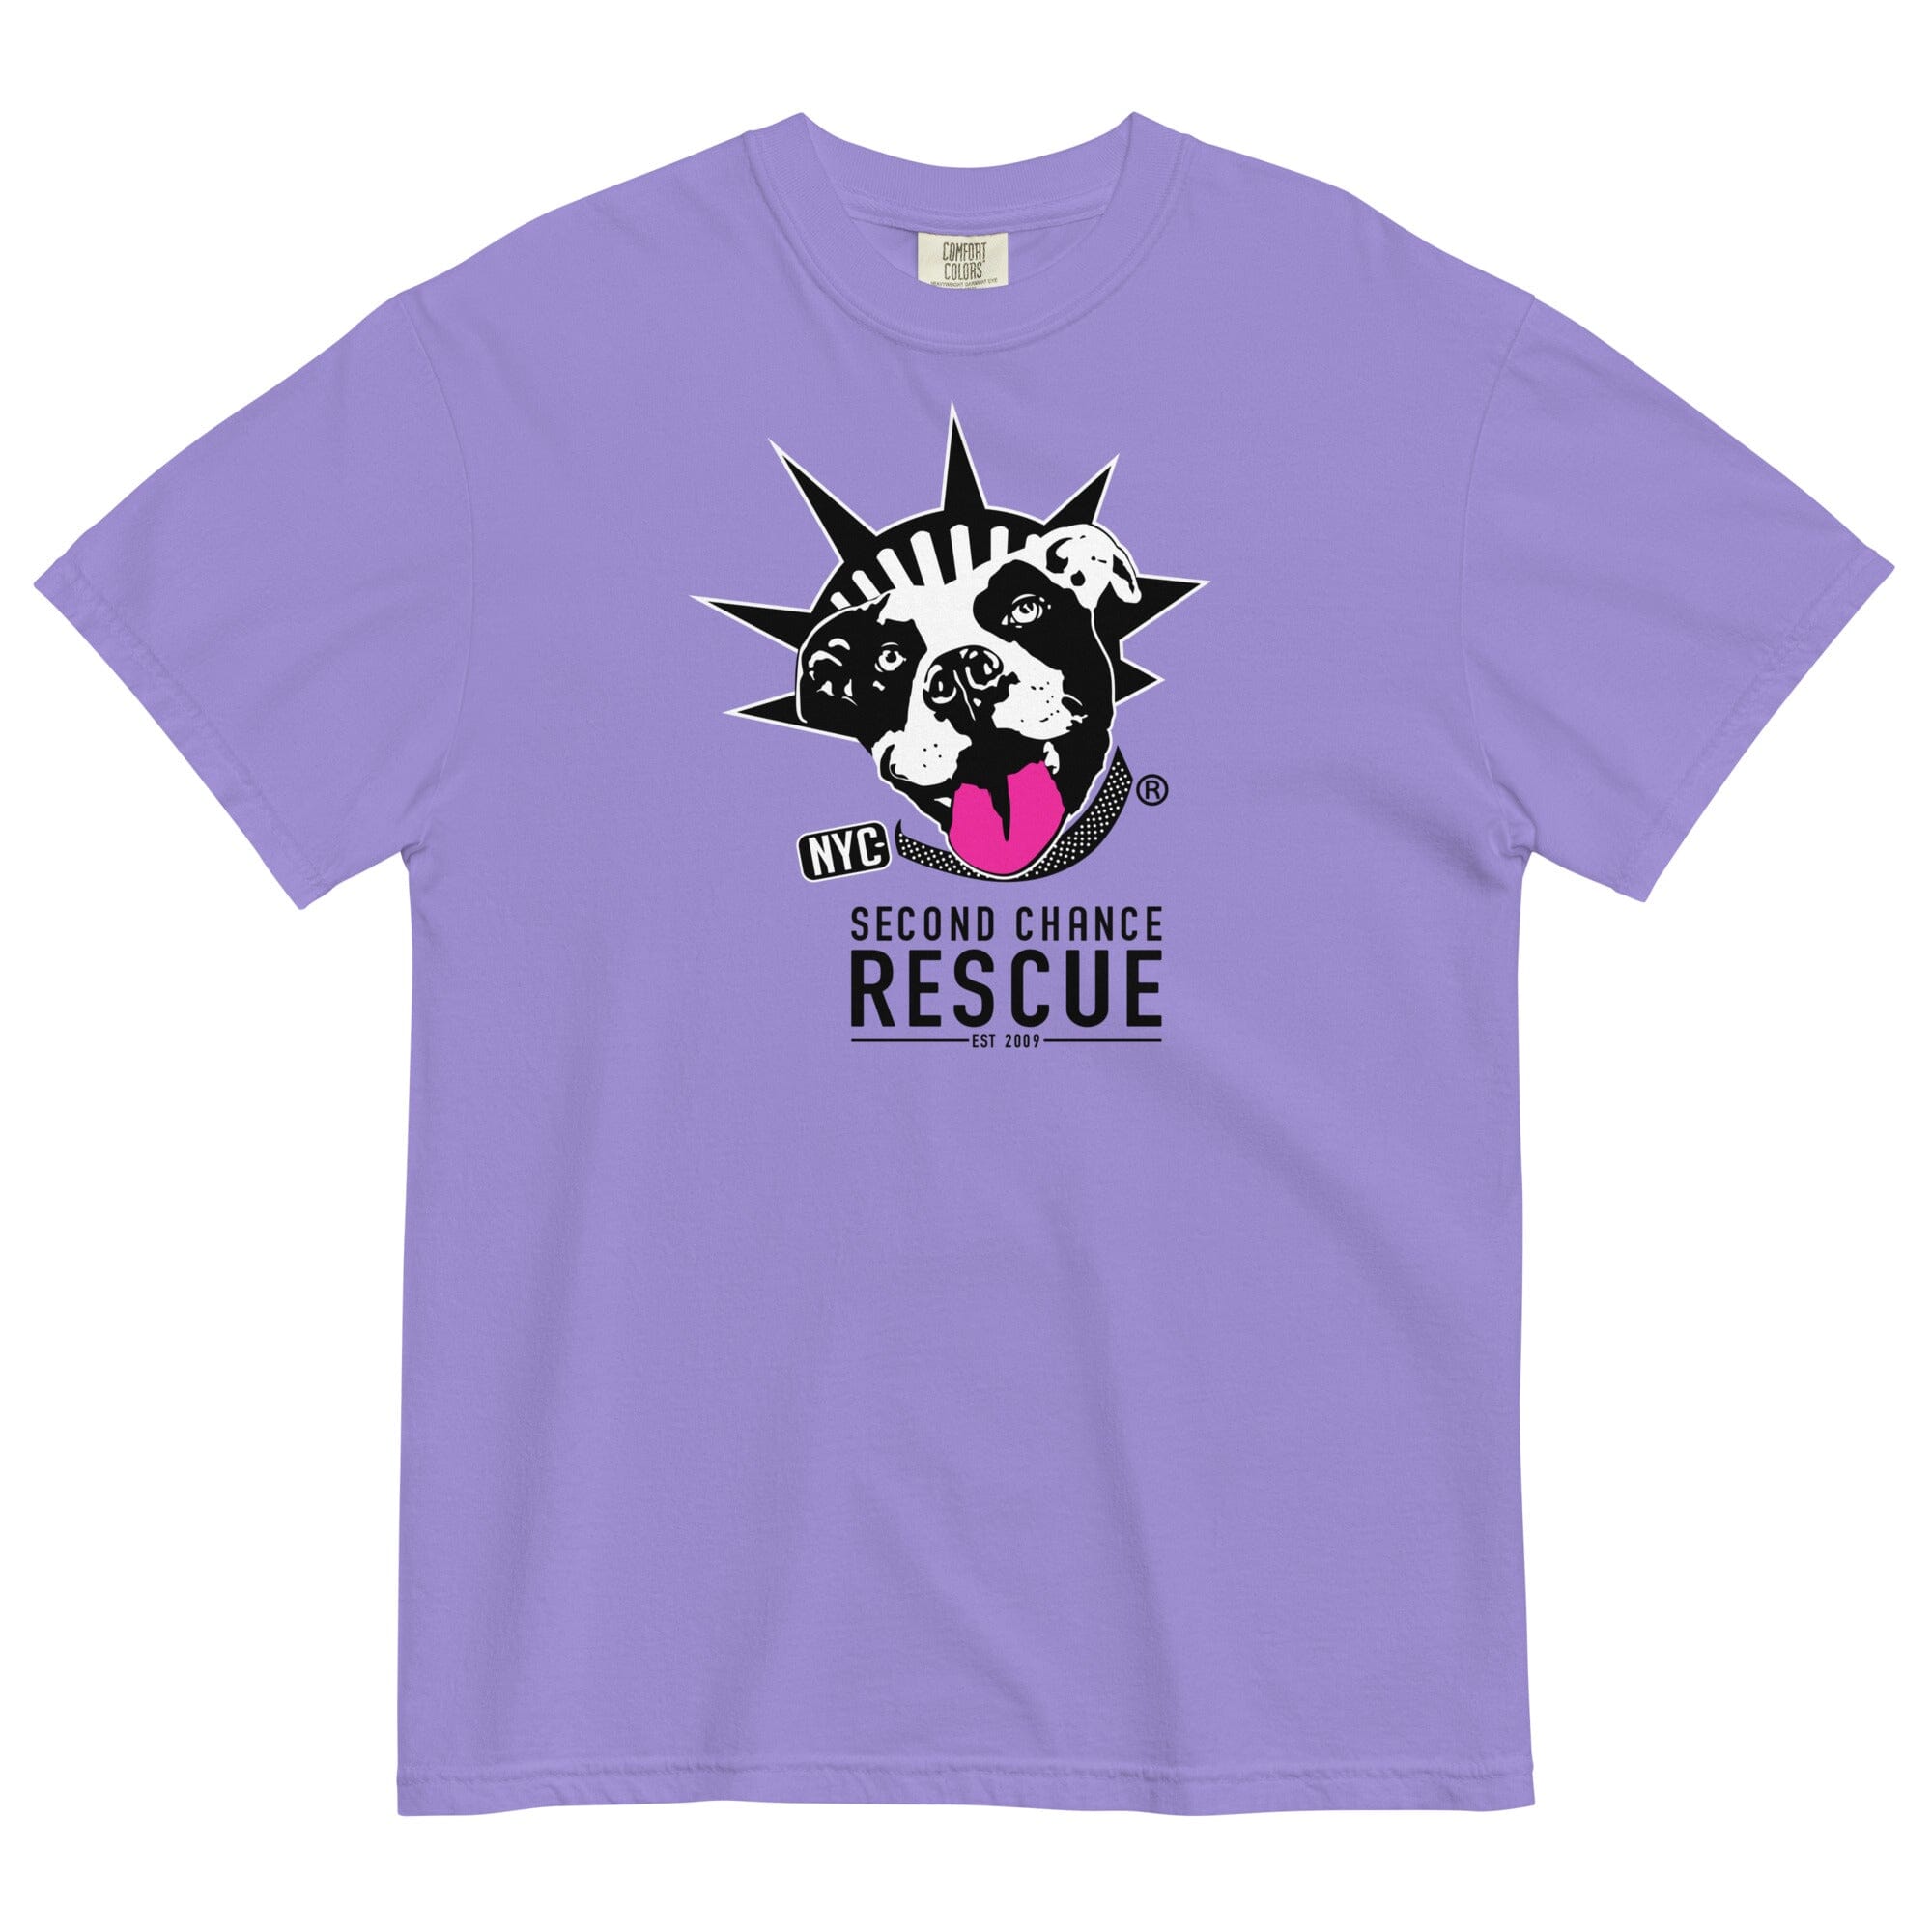 NYC Second Chance Rescue (PIGMENT DYED UNISEX T)